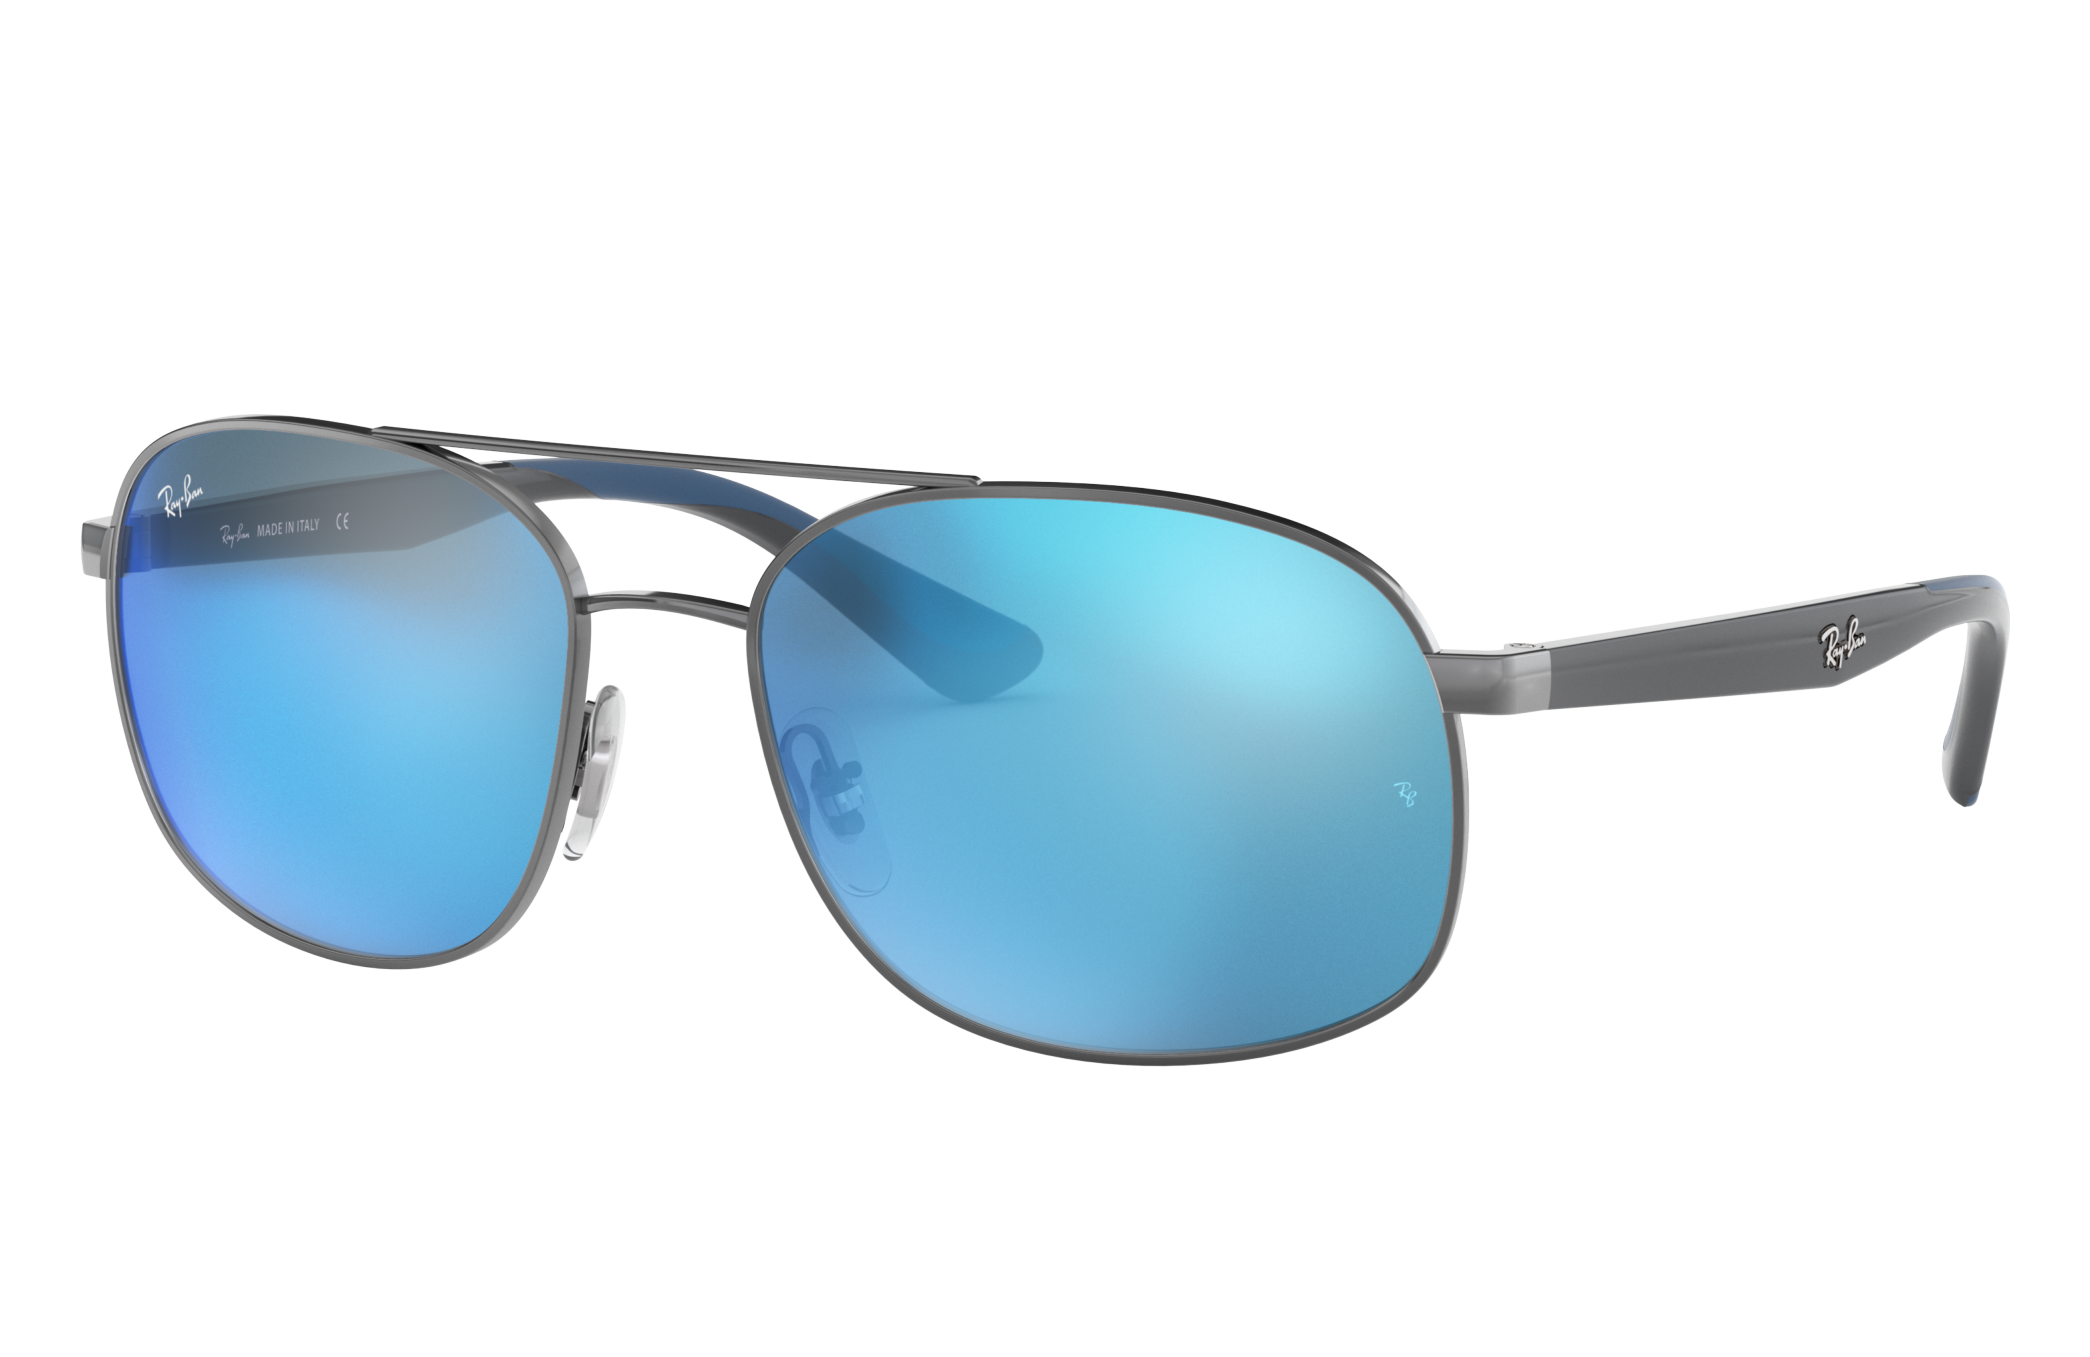 Rb3593 Sunglasses in Gunmetal and Blue - RB3593 | Ray-Ban® US